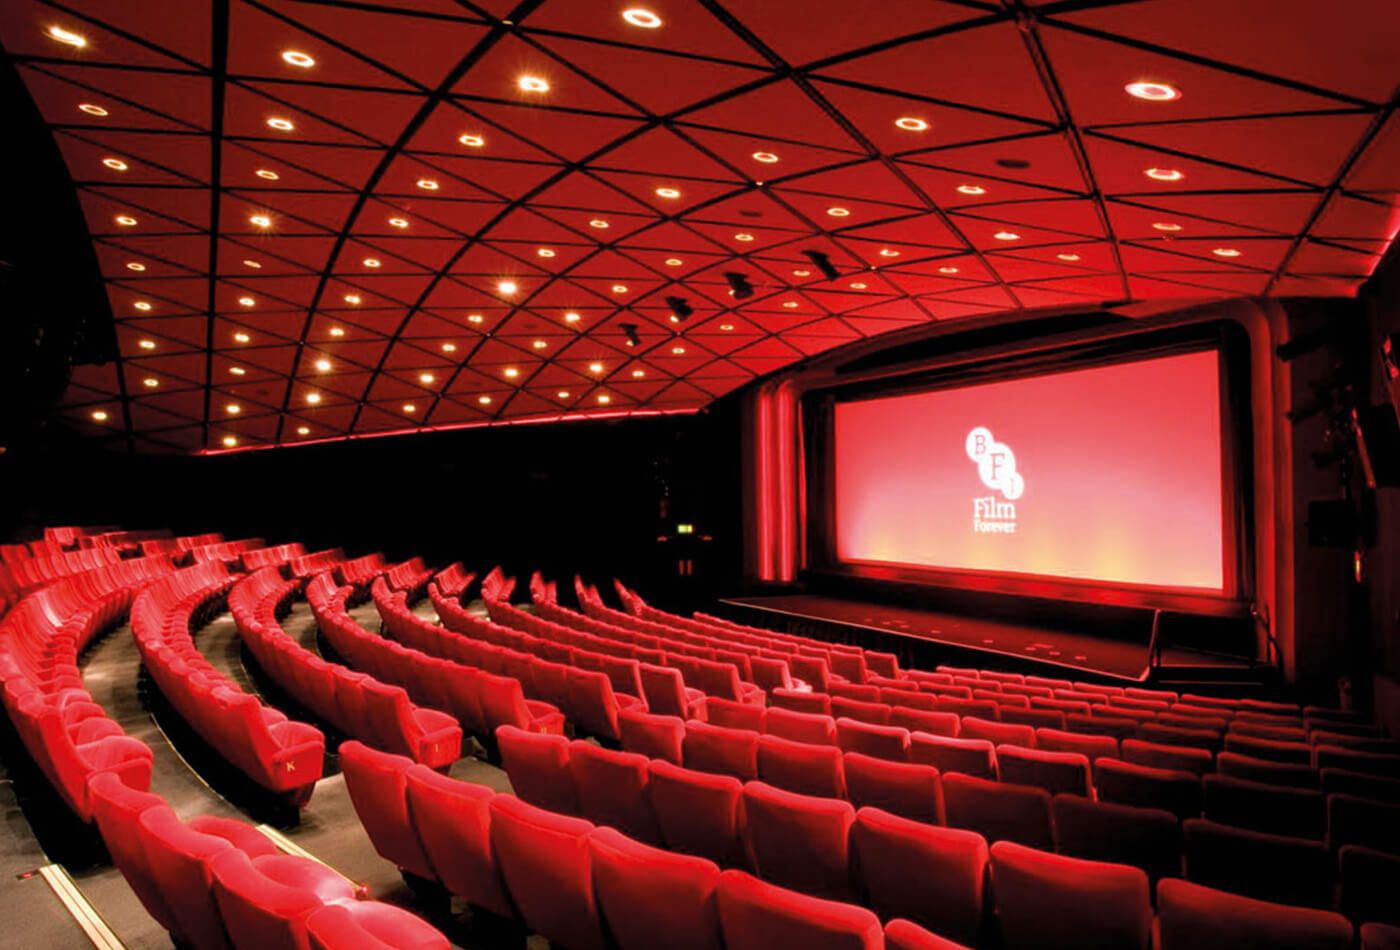 Interior shot of red velvet seats and stage with a red screen